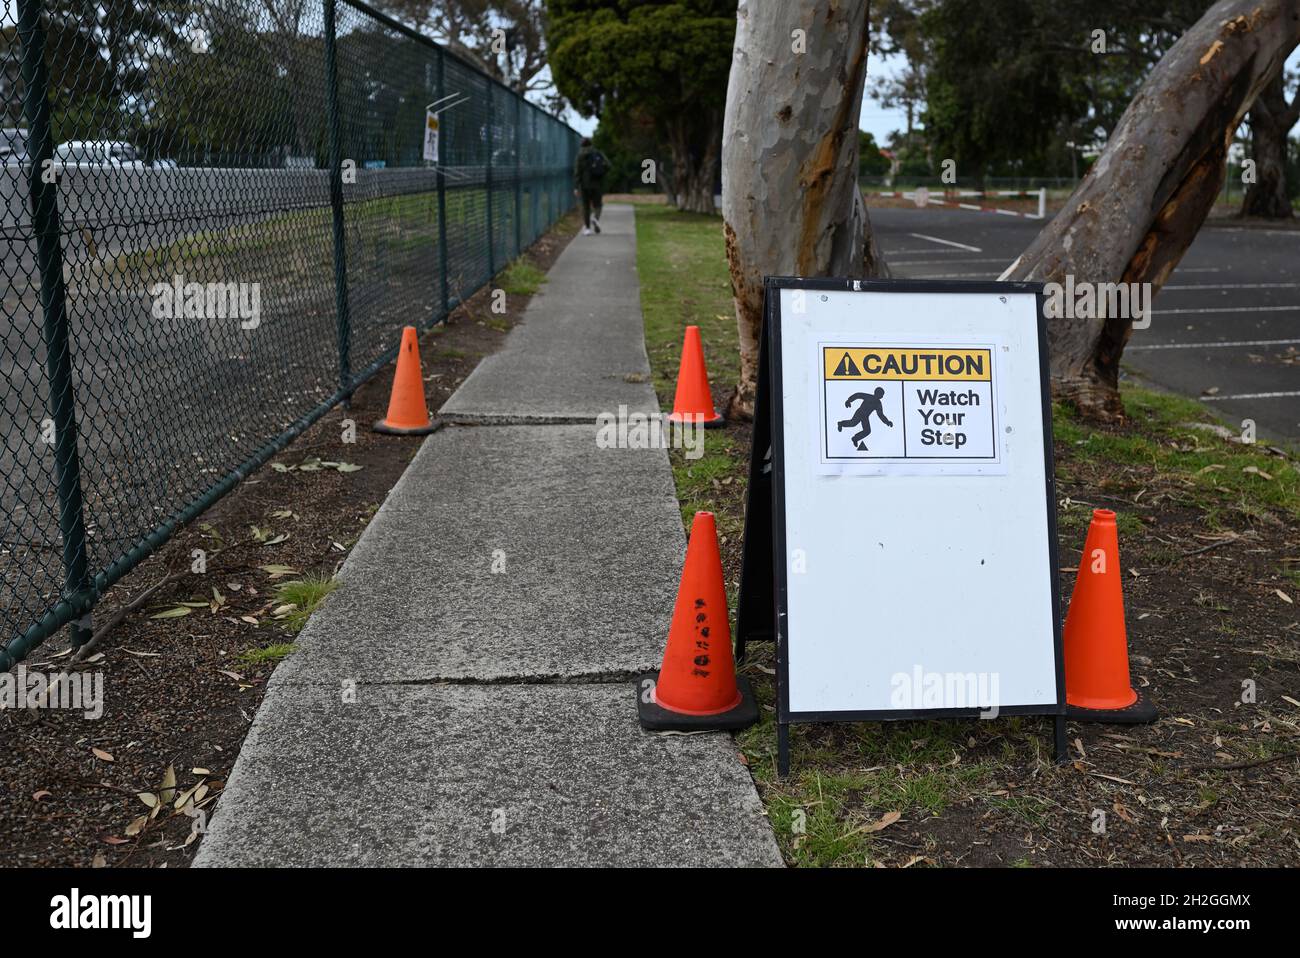 Caution watch your step sign, warning about uneven pavement on a footpath, with orange traffic cones. A person can be seen walking in the background Stock Photo